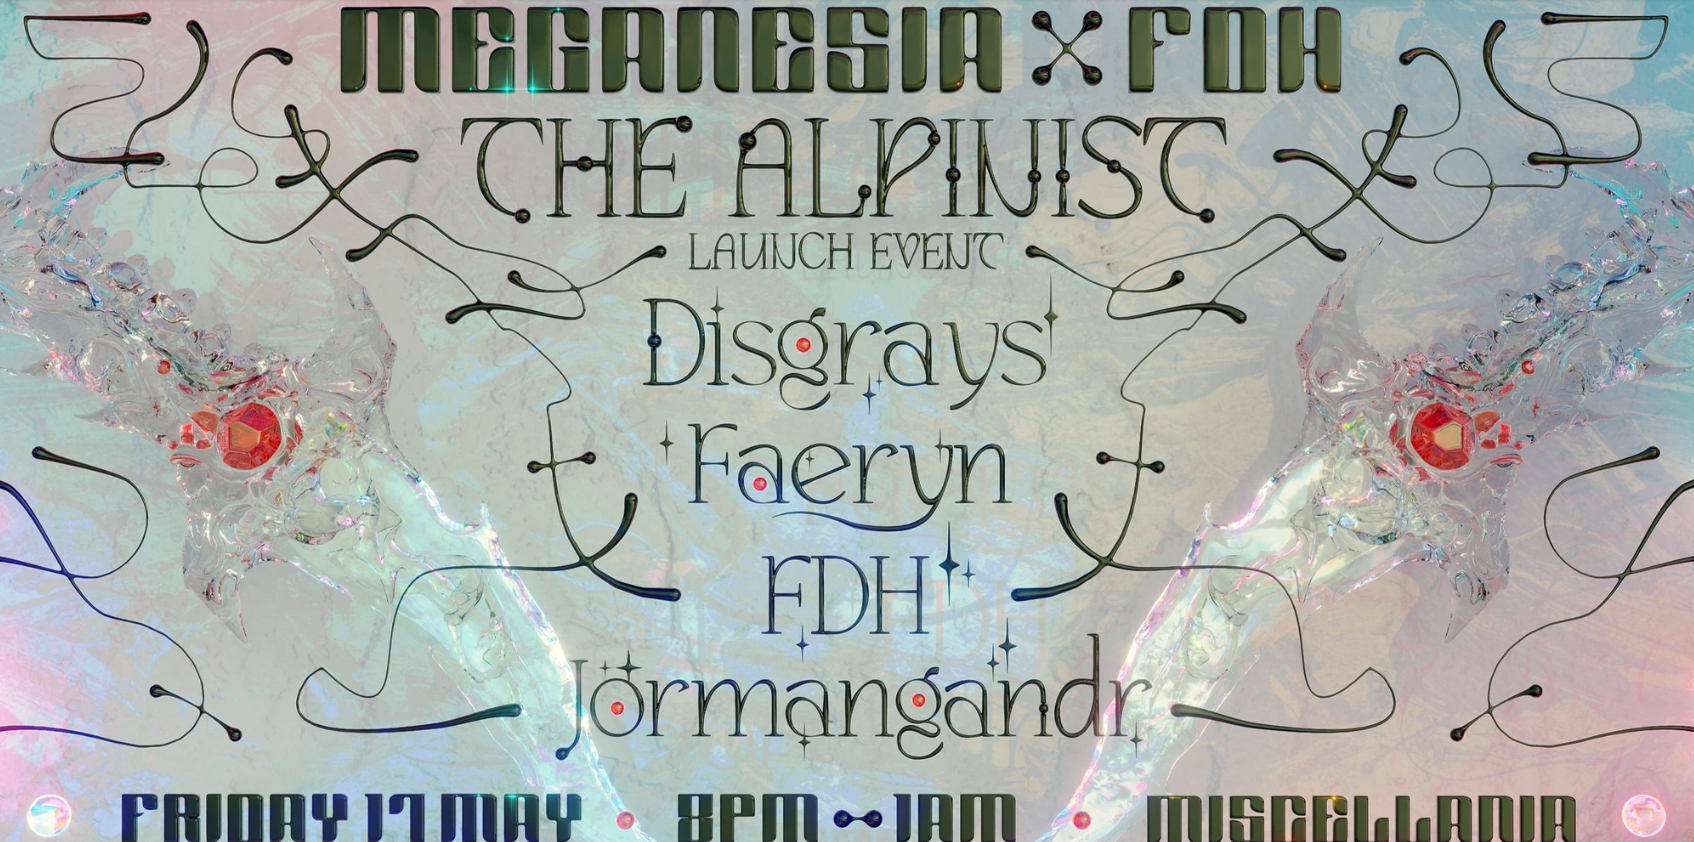 Meganesia pres. FDH 'The Alpinist' EP Launch - フライヤー表